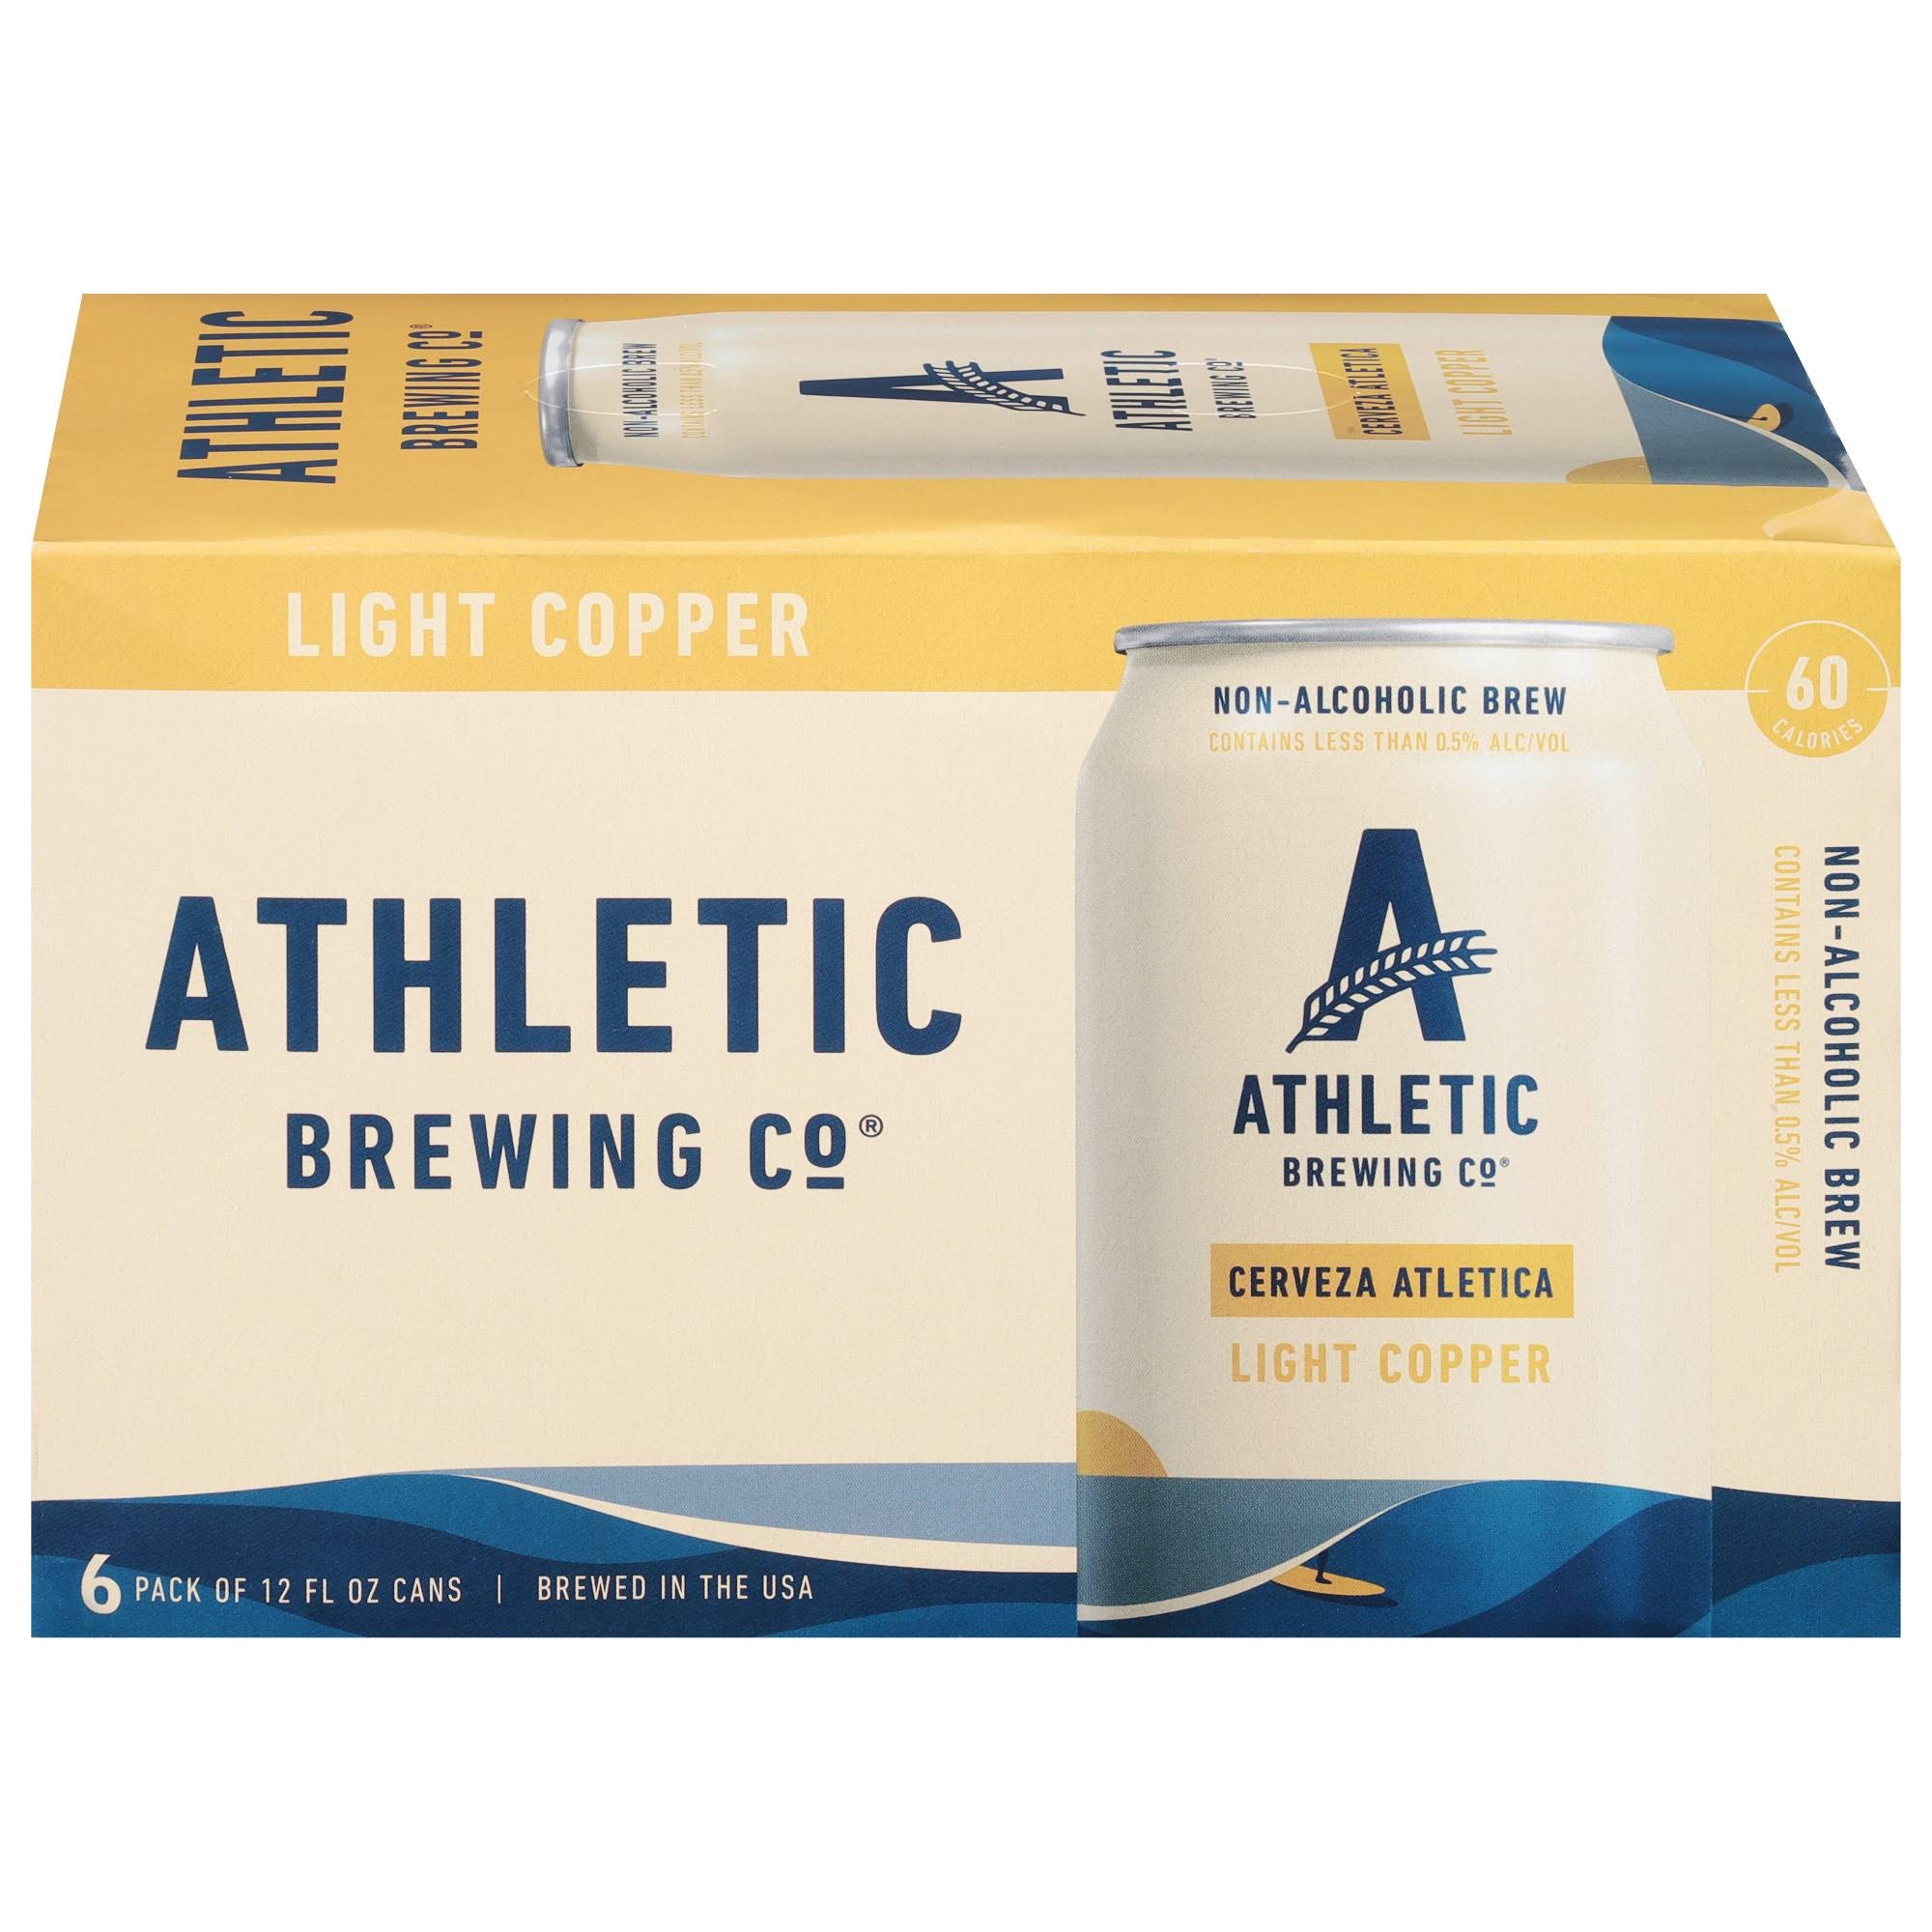 Athletic Brewing Co. - Cerveza Atletica Non-Alcoholic Light Copper (6 Pack 12oz cans)